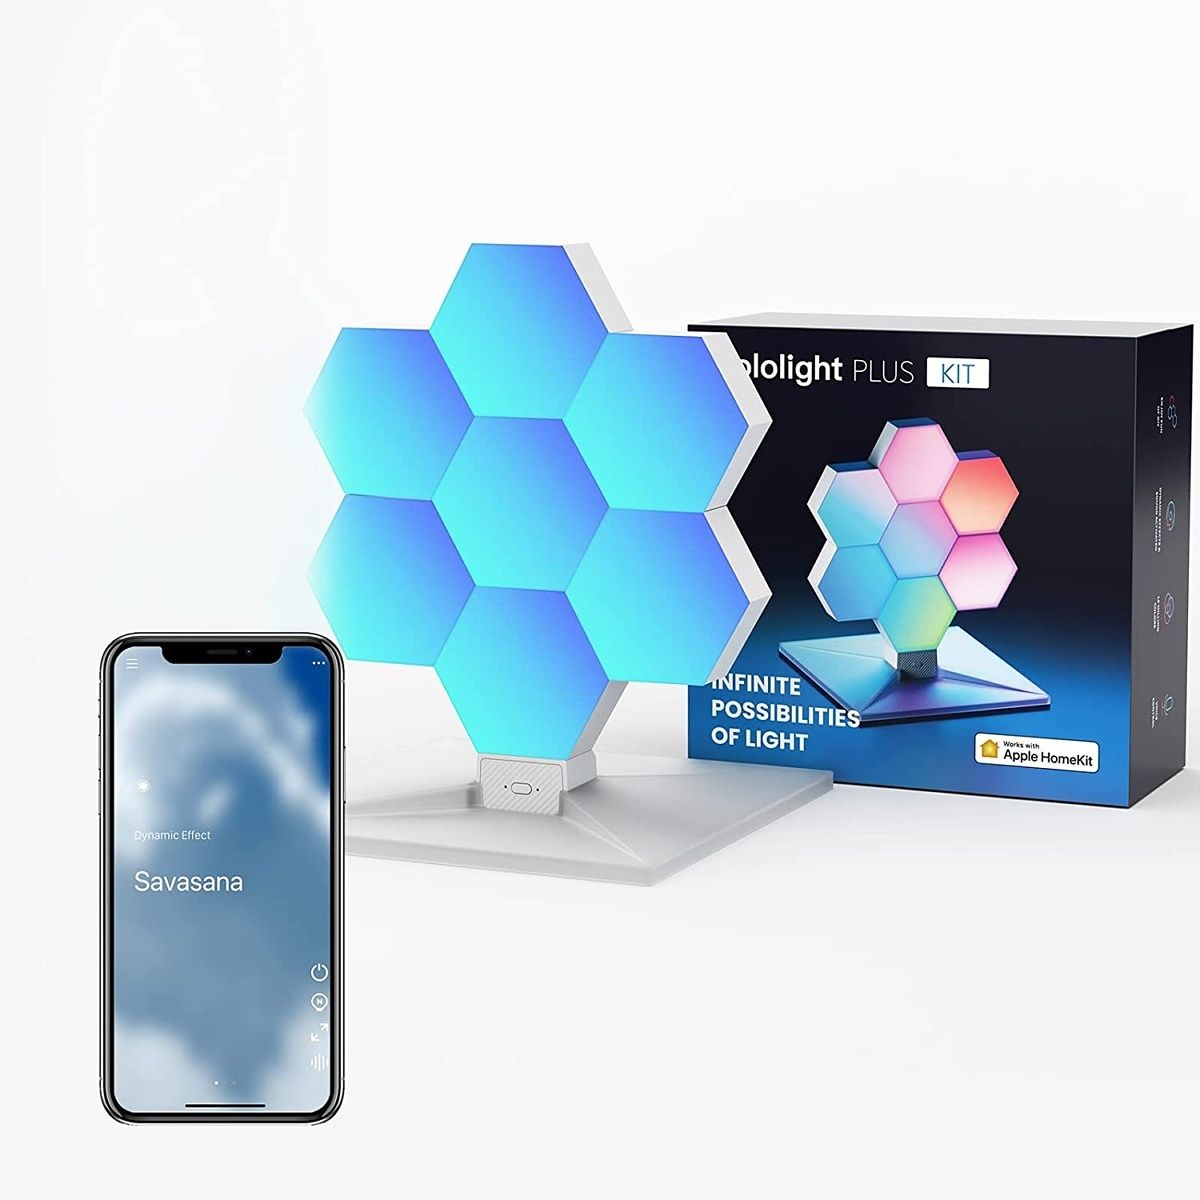 The Cololight Hexagon Light Plus Kit is accessible to all thanks to its low price tag. You get a satisfying color payoff, fun options in-app, and voice assistant support. Prepare yourself for a complex installation process and a finicky companion app though.